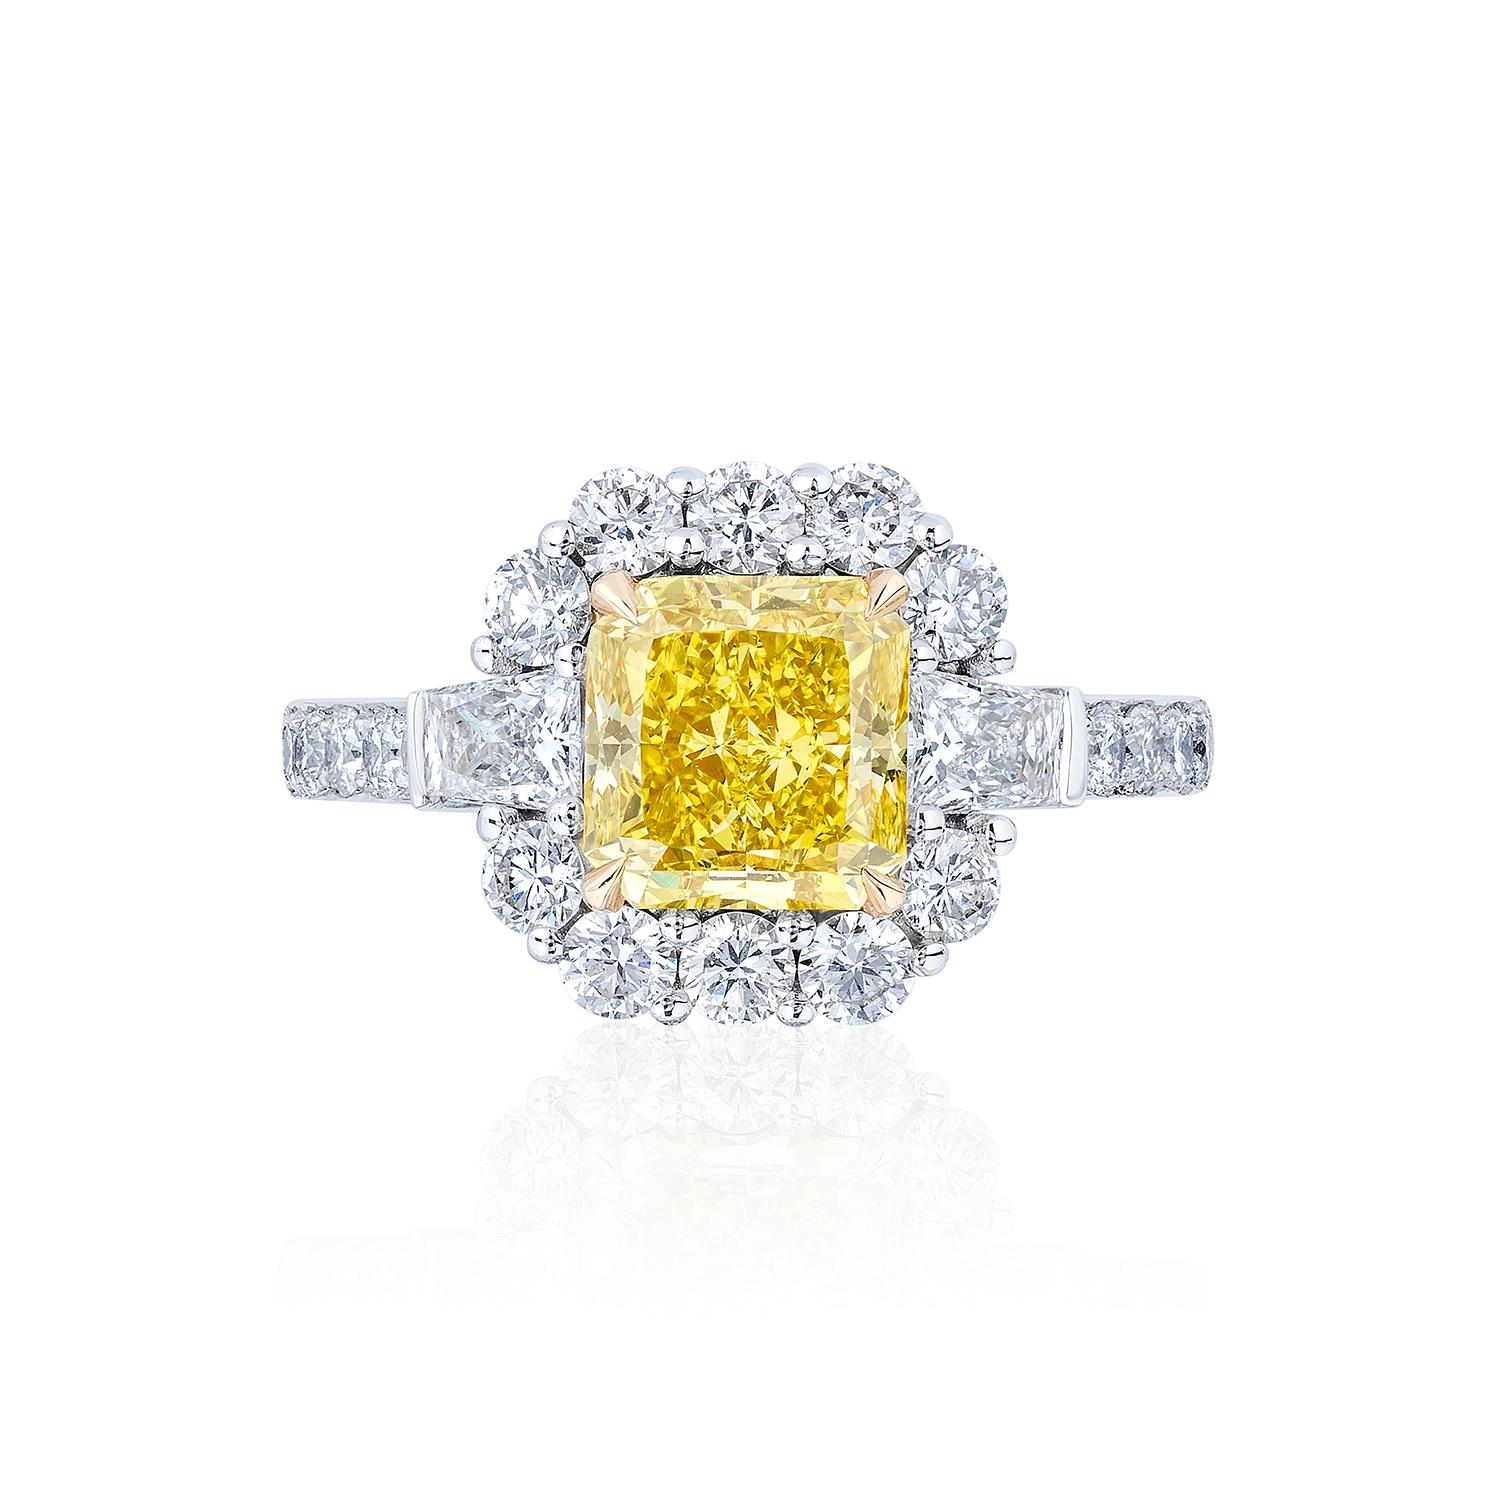 2.38 Carat Fancy Vivid Yellow Diamond flanked by Brilliant cut tapered baguettes and surrounded by Round Brilliant Diamonds.

Certified by GIA and Set in platinum and 18 Karat Yellow Gold.